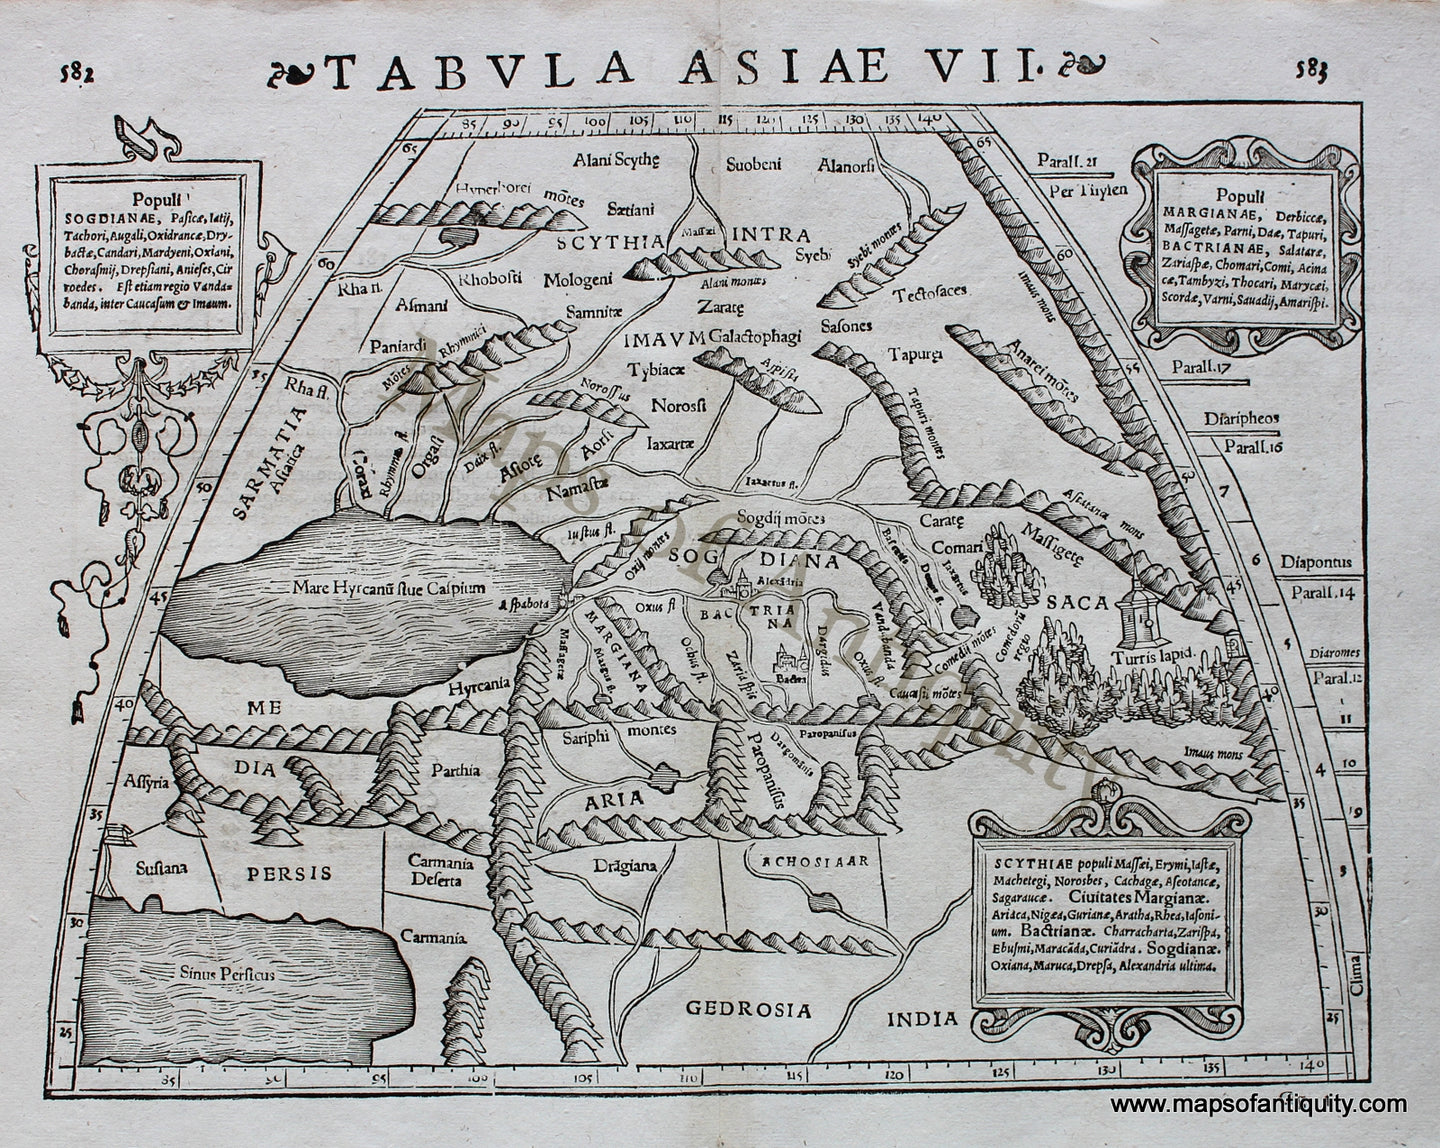 Antique-Black-and-White-Engraved-Map-Tabula-Asiae-VII-Strabonis-Asia-**********-Asia--1542-Munster-Maps-Of-Antiquity